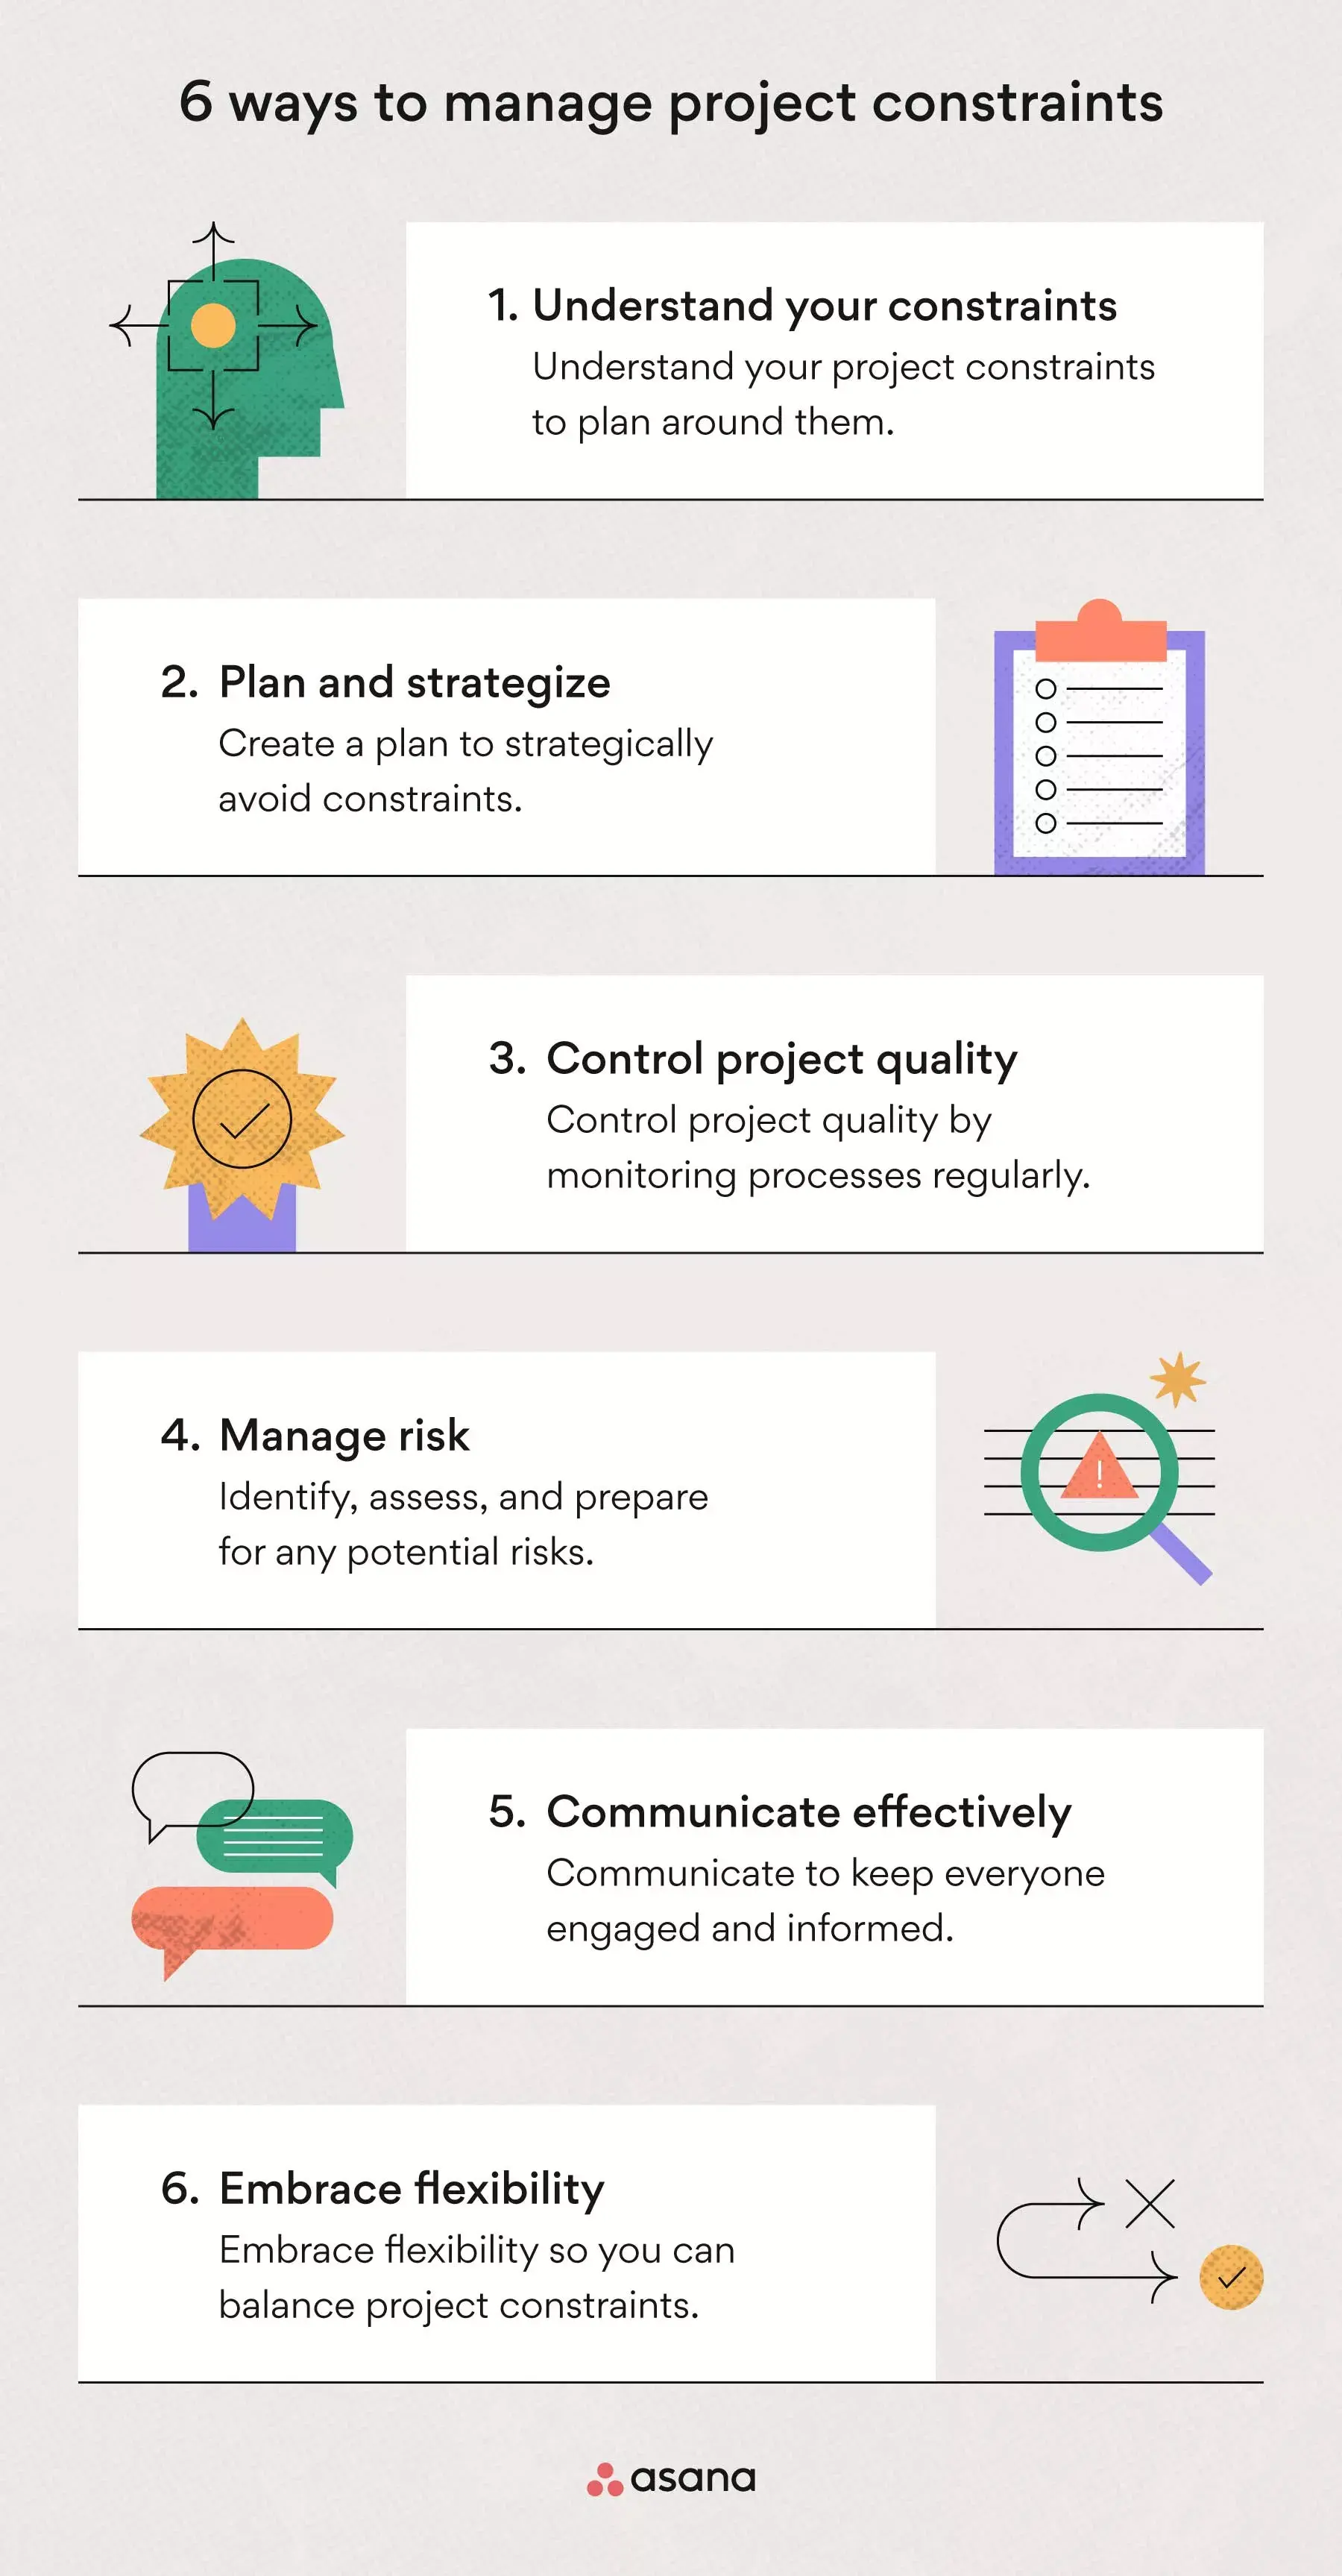 [inline illustration] 6 ways to manage project constraints (infographic)